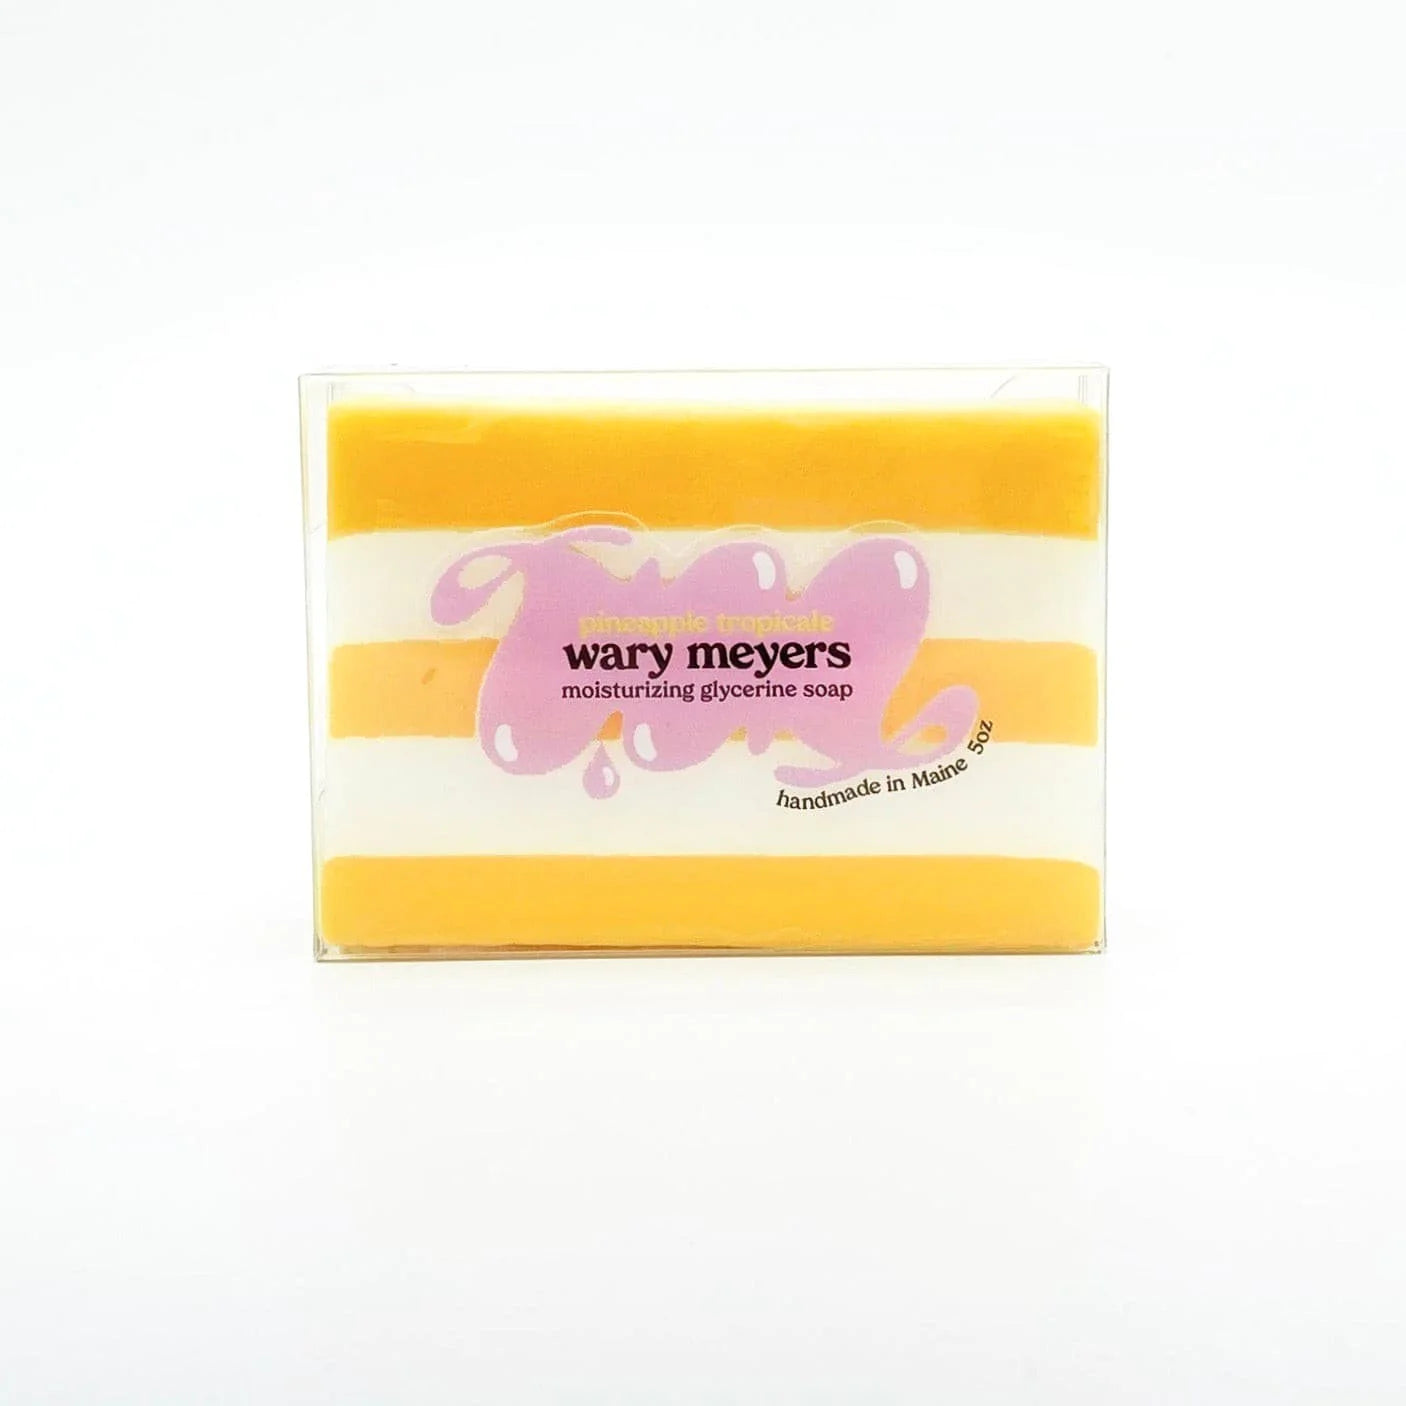 A bar of Wary Meyers Moisturizing Glycerine Soap, featuring horizontal yellow and white stripes, with the brand name and logo in a purple design, stating &quot;handmade in Scottsdale Arizona.